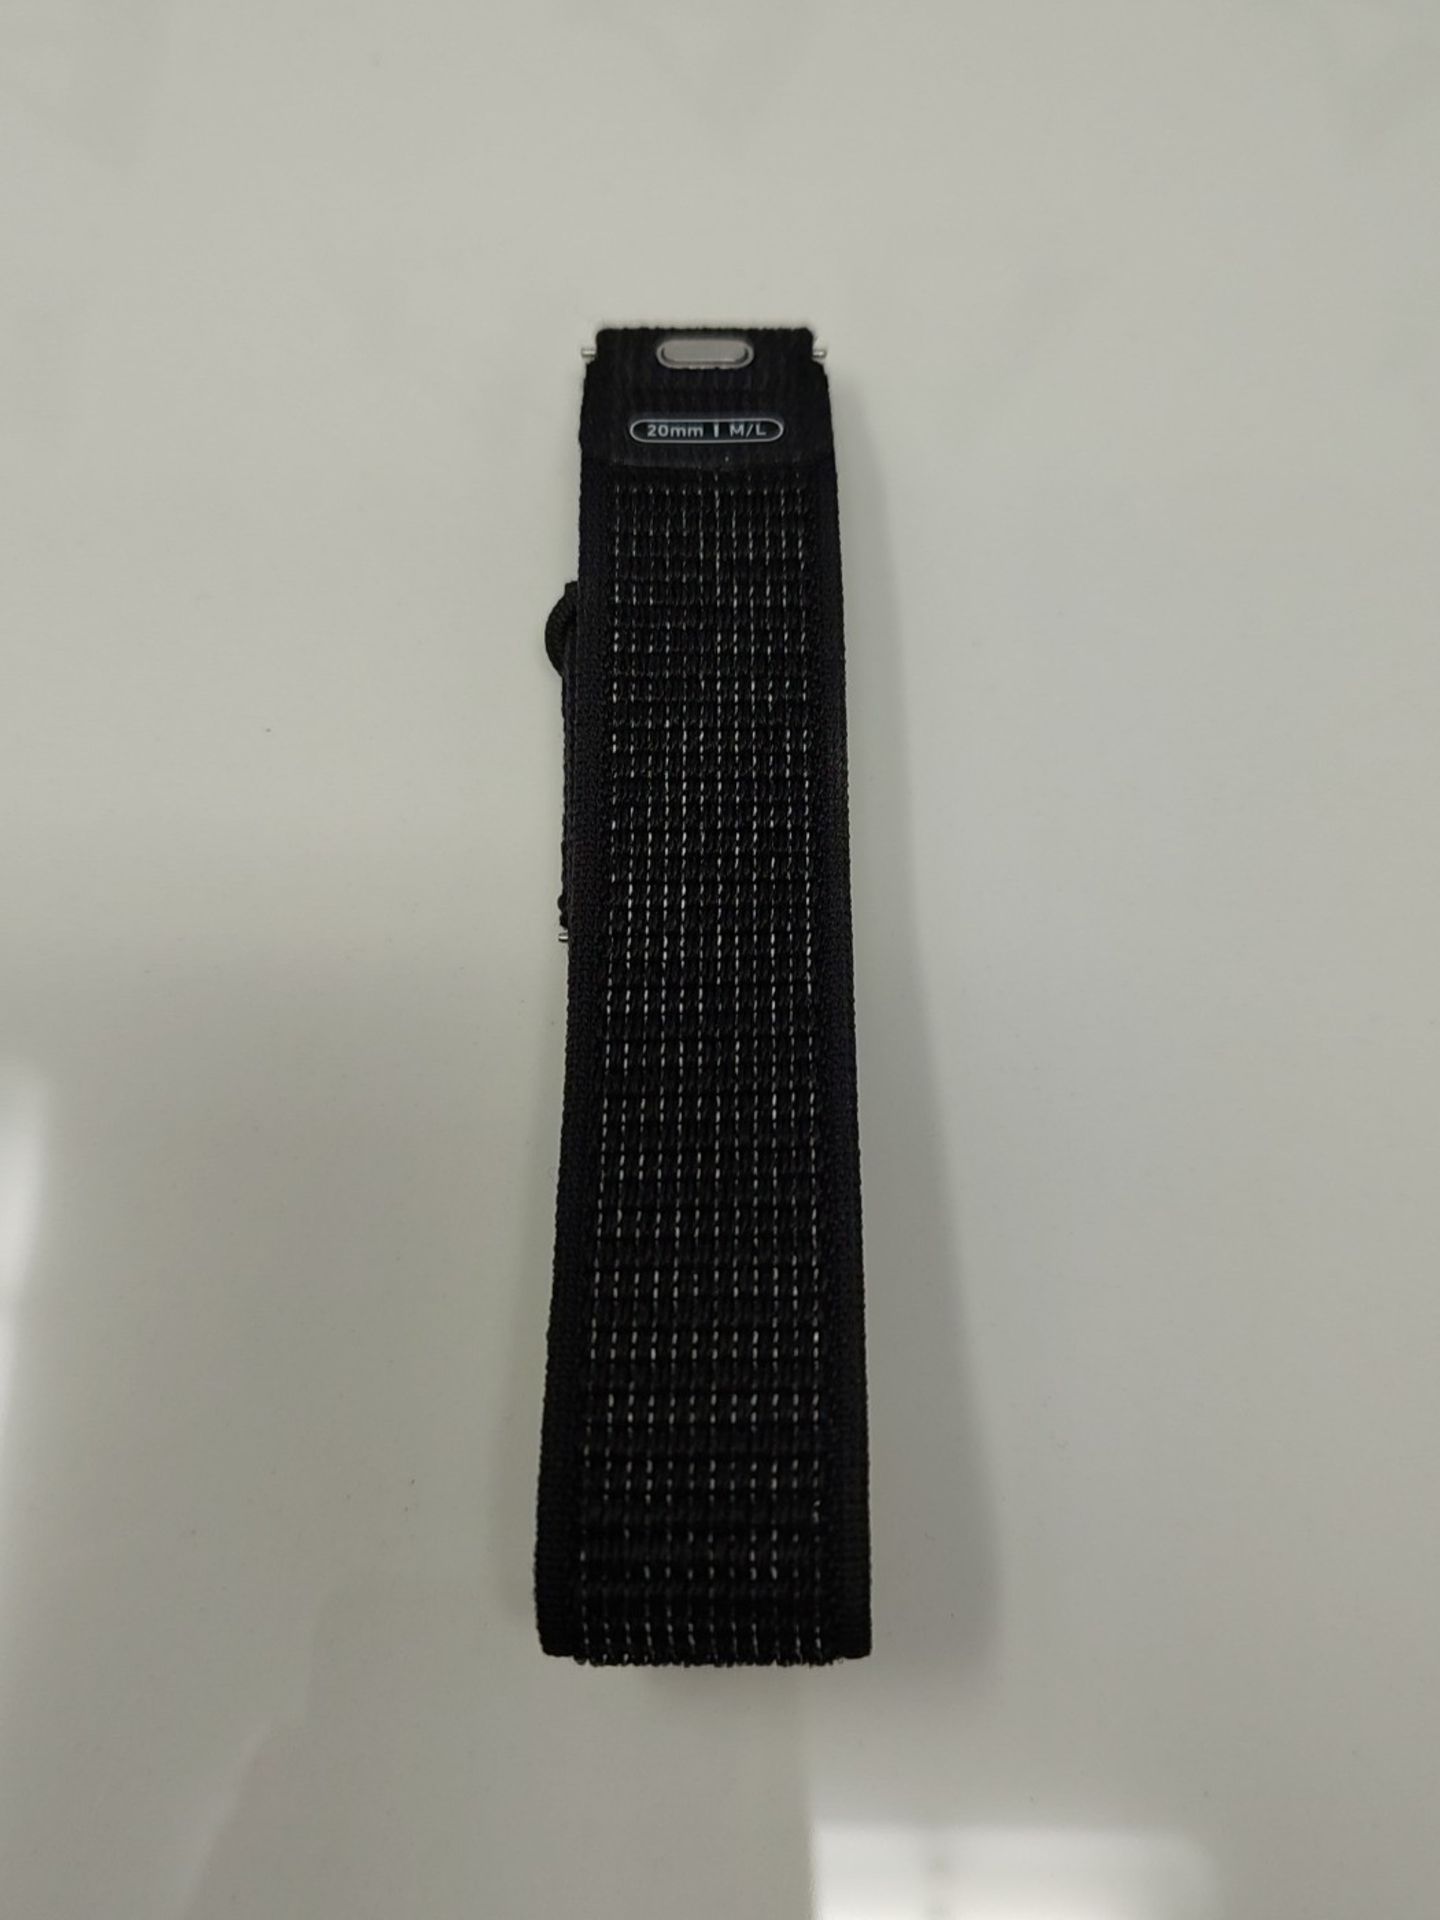 Samsung Galaxy Official Fabric Band (Wide, M/L) for Galaxy Watch, Black - Image 2 of 2